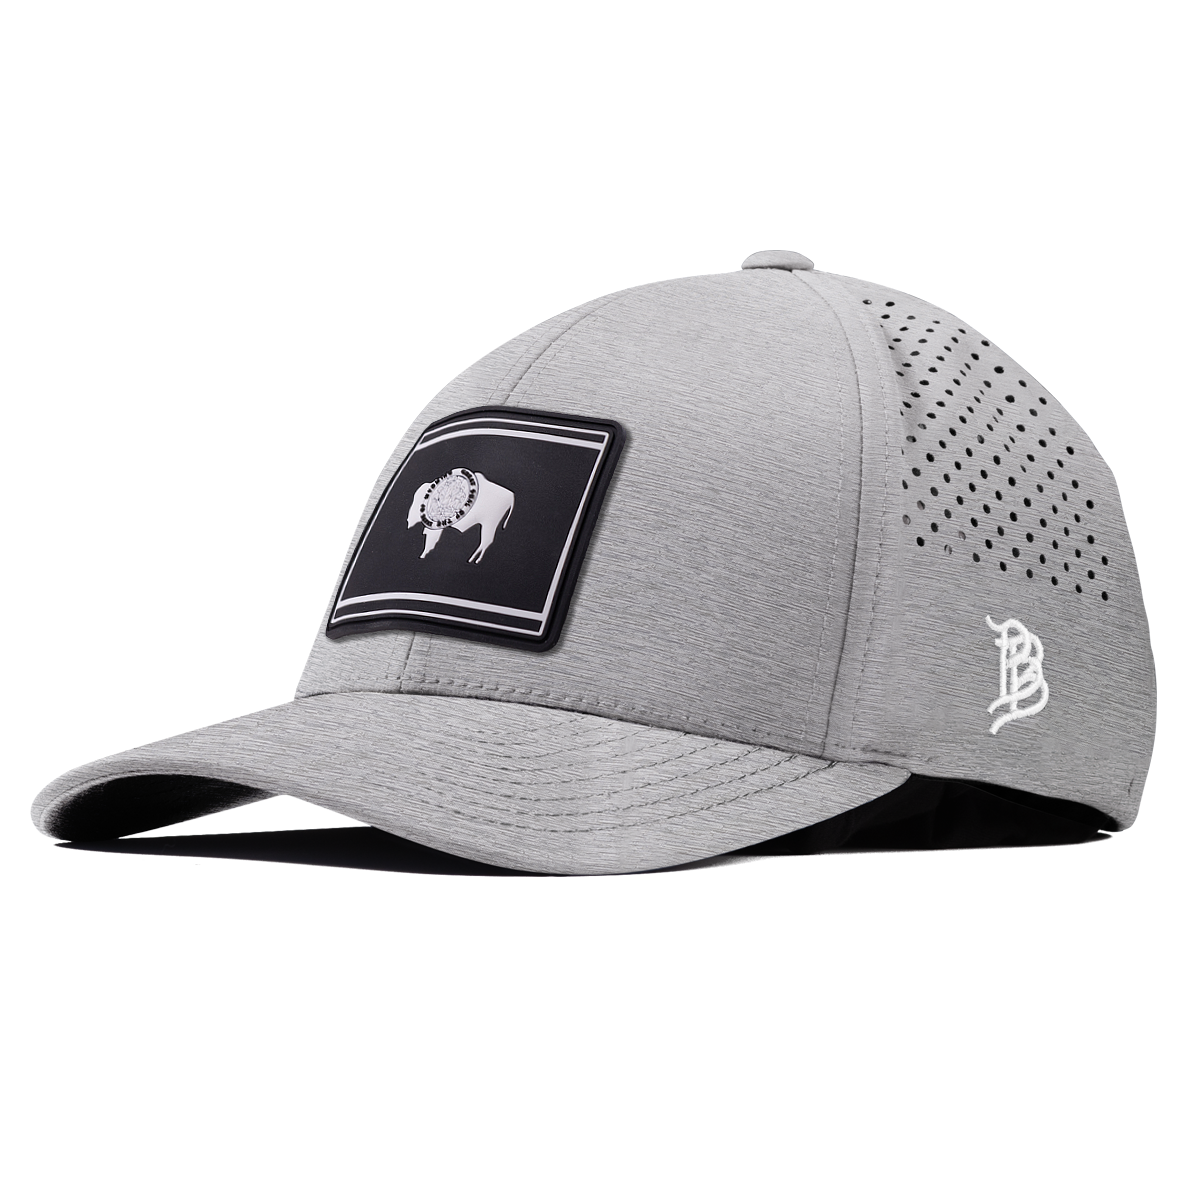 Wyoming Vintage Curved Performance Heather Gray